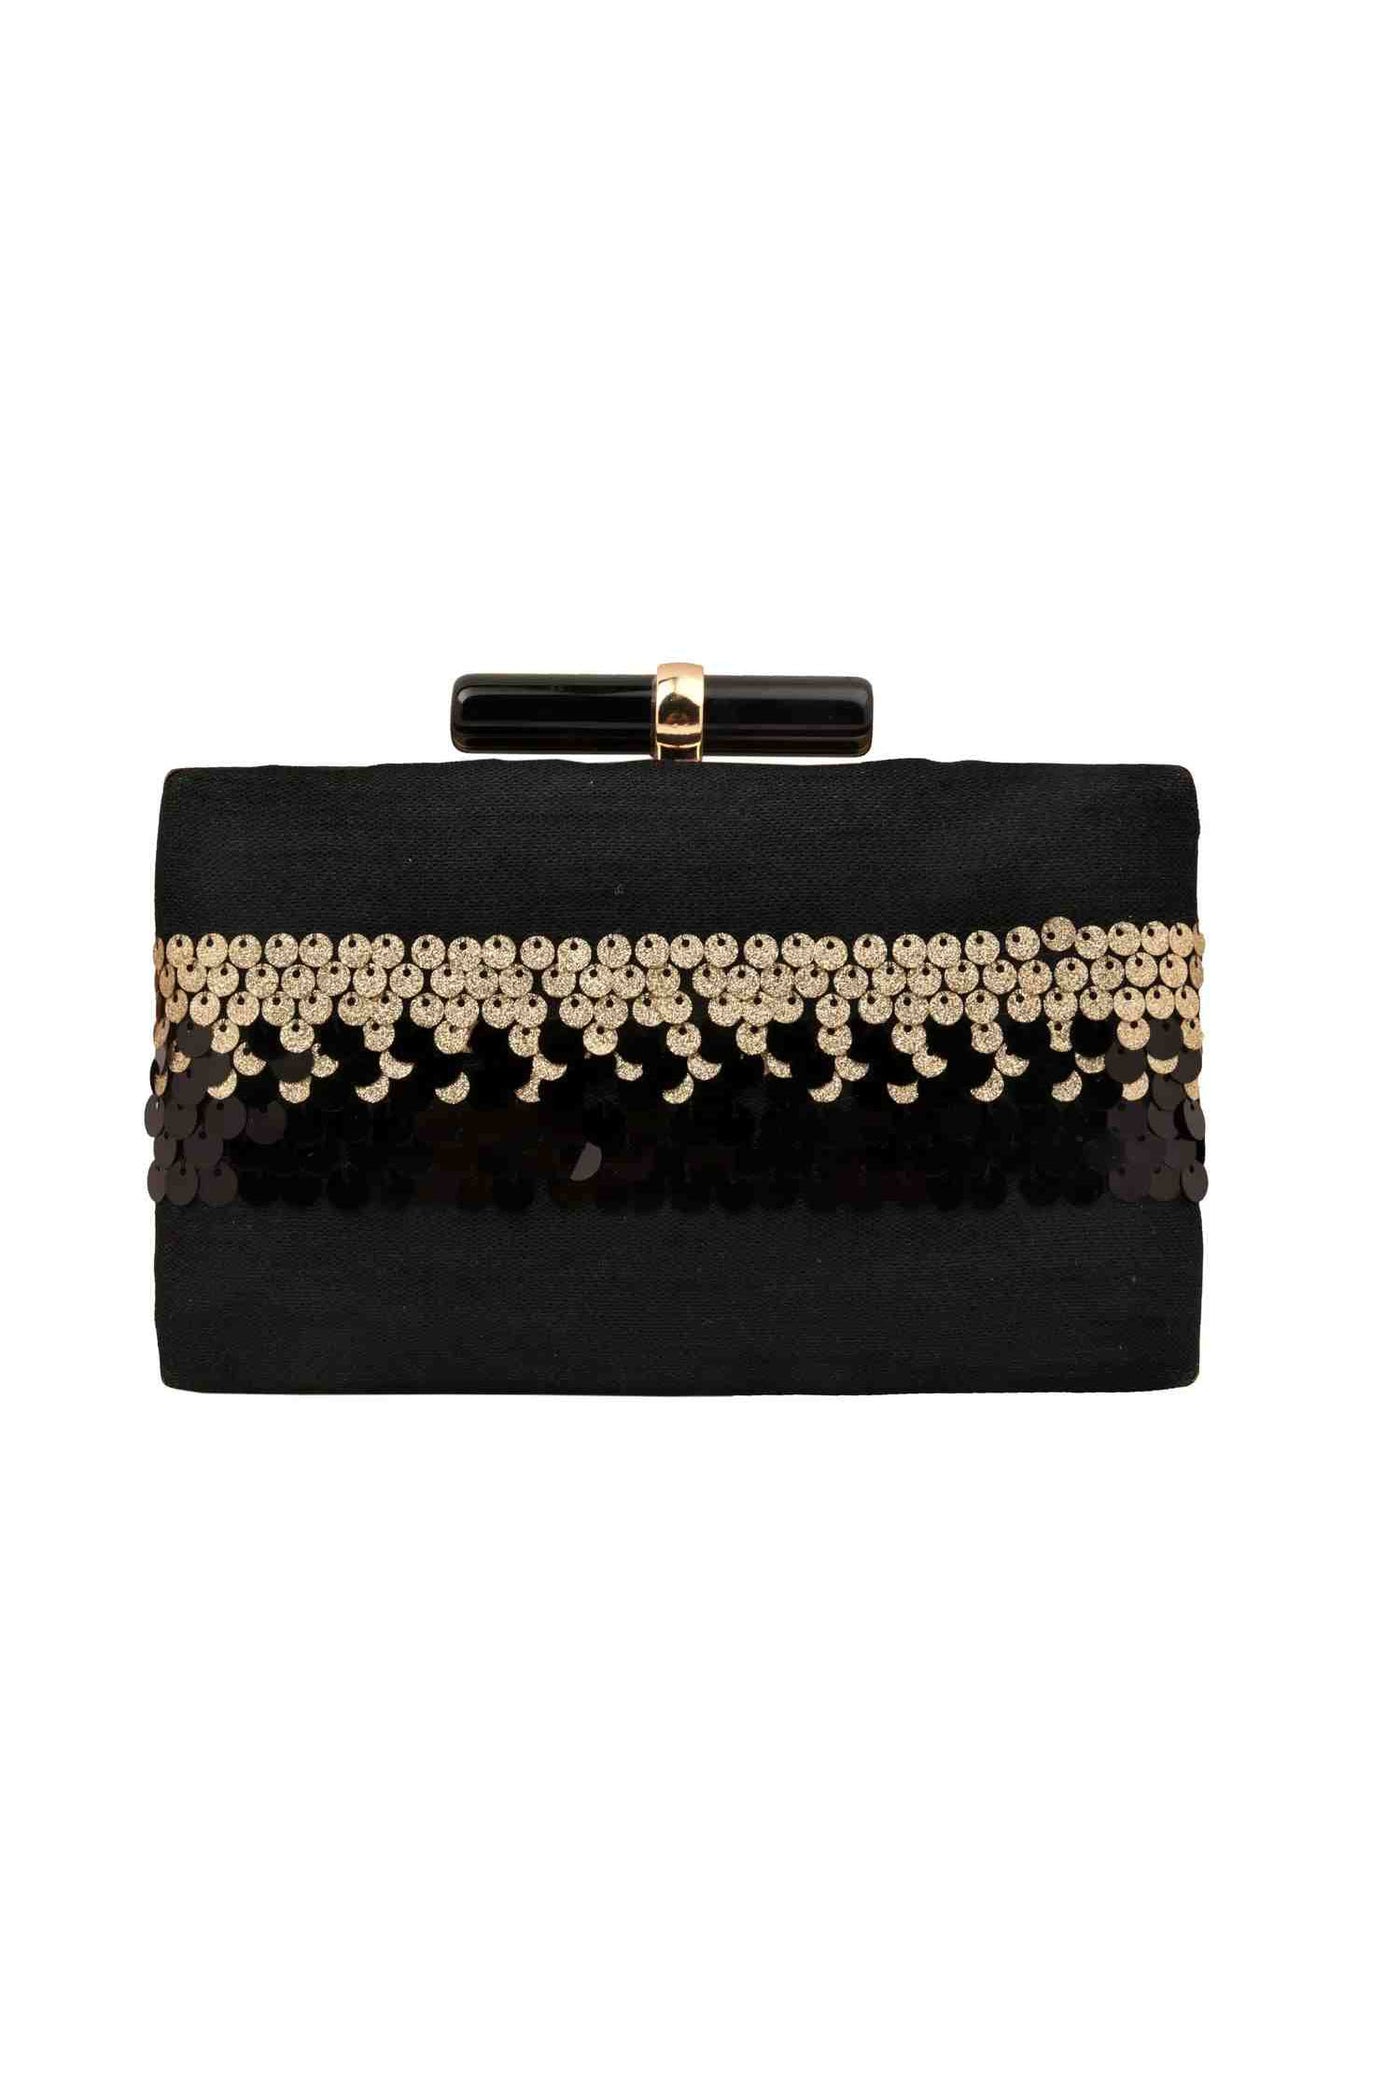 Black and Dull Gold Sequins Party Clutch